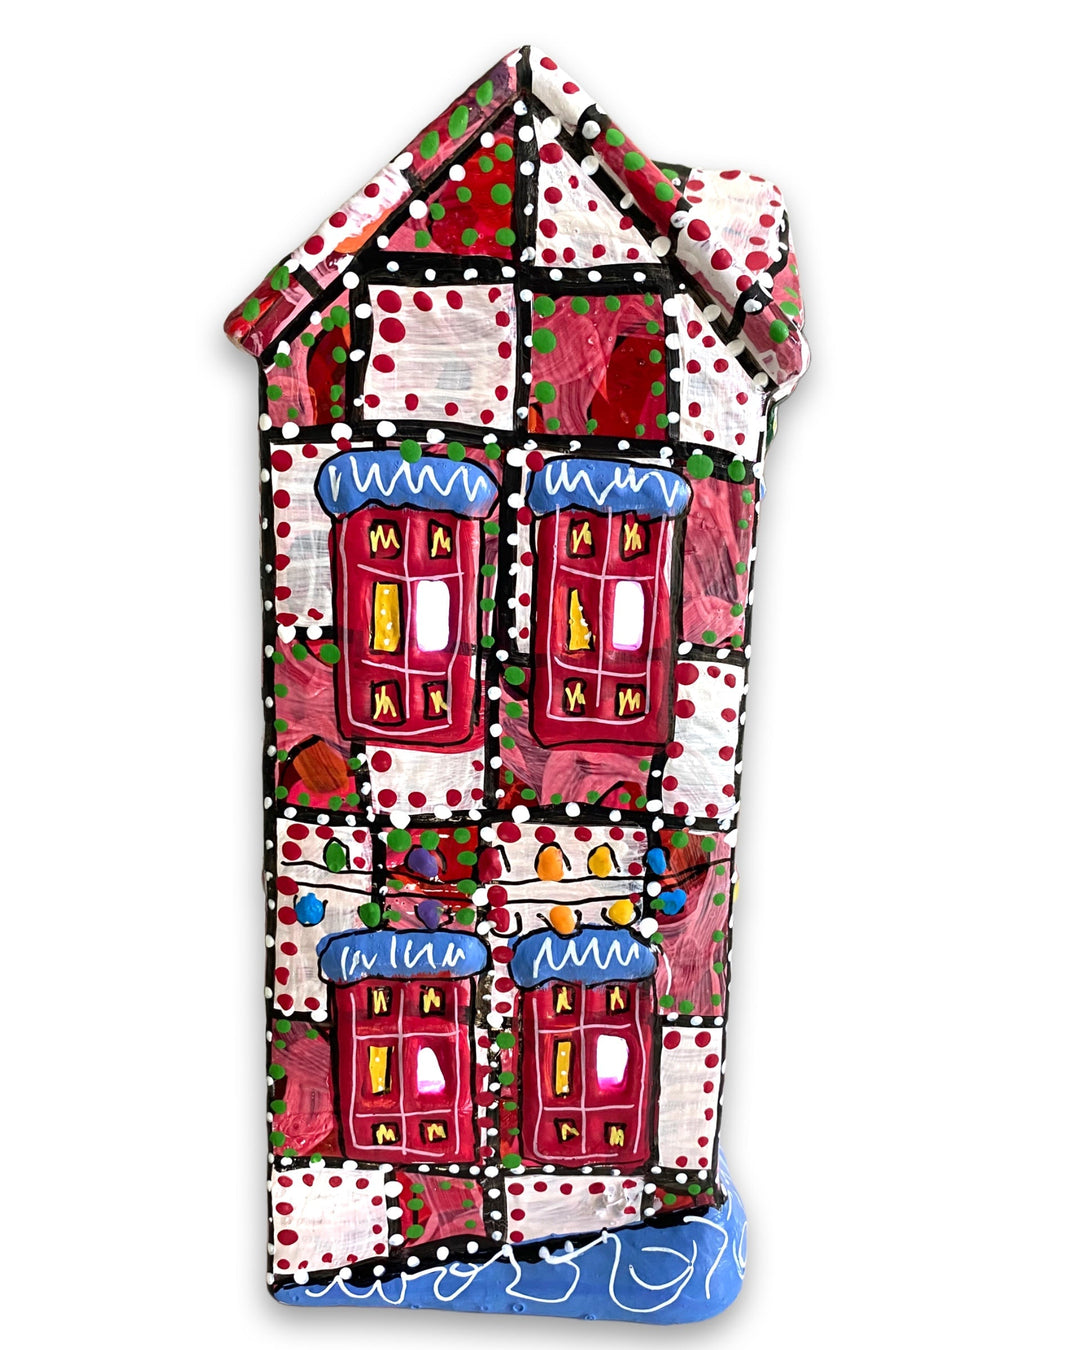 The Gallery Red & White Edition Hand Painted Ceramic LED Christmas Village House - Heather Freitas 